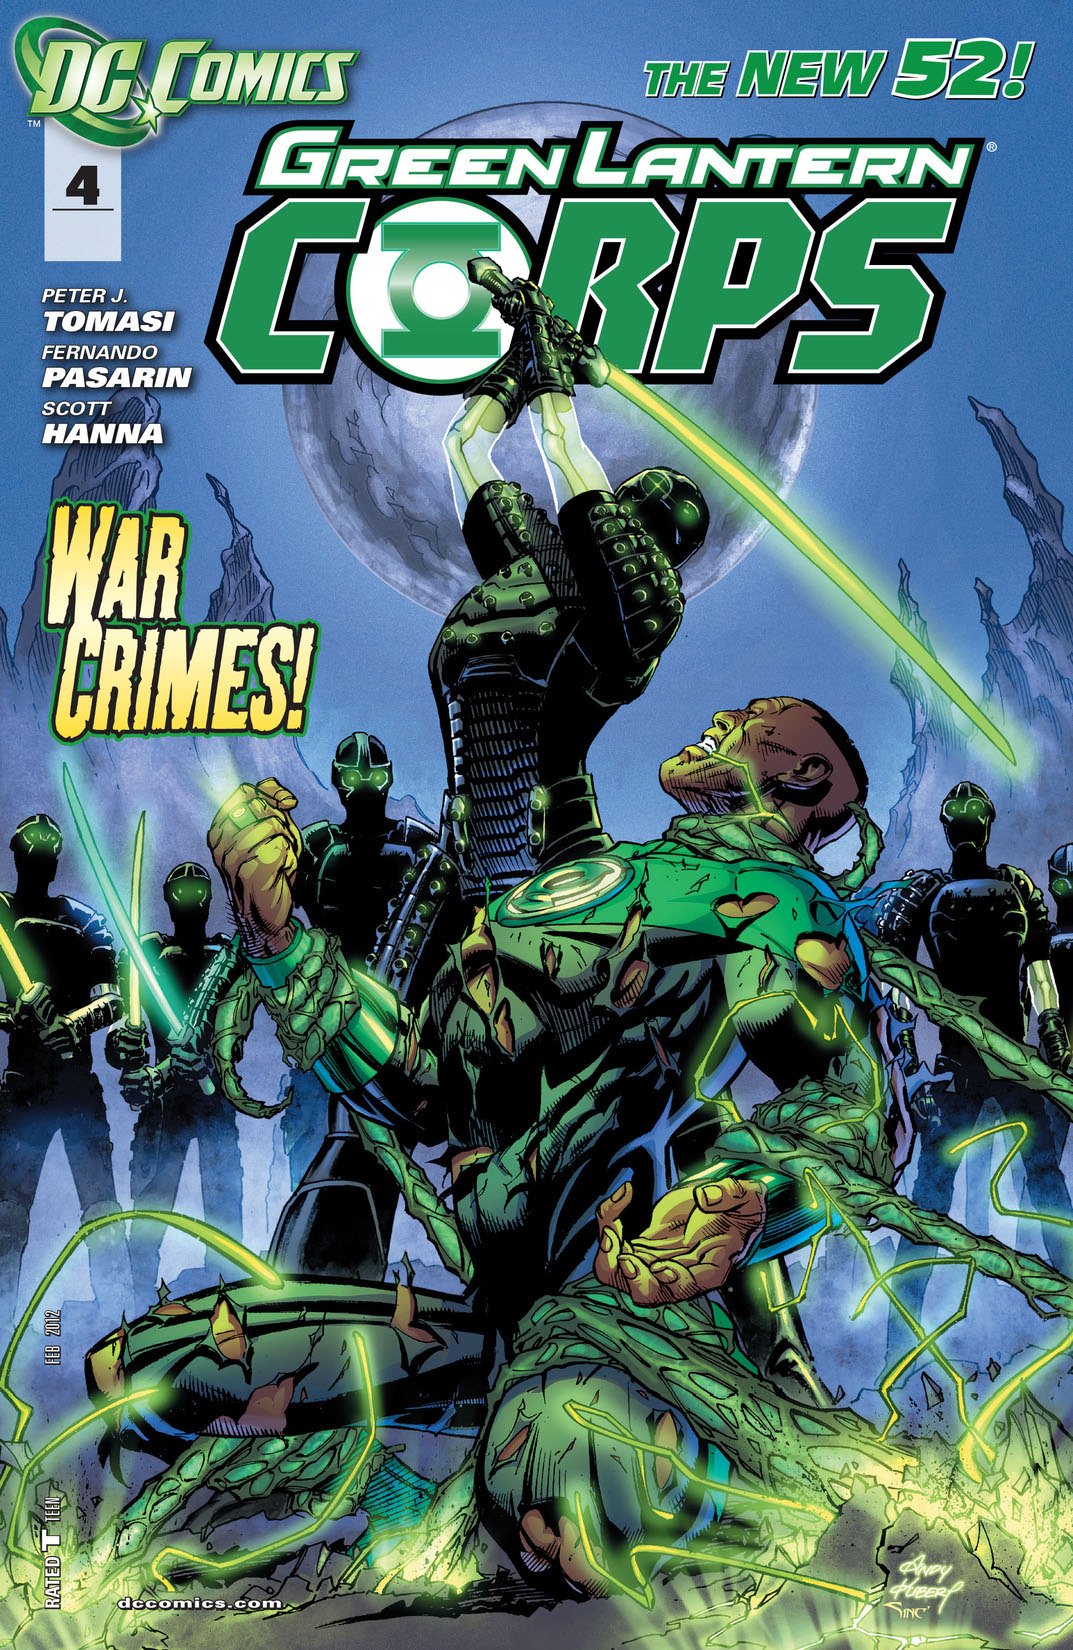 Green Lantern Corps (2011-) #4 preview images